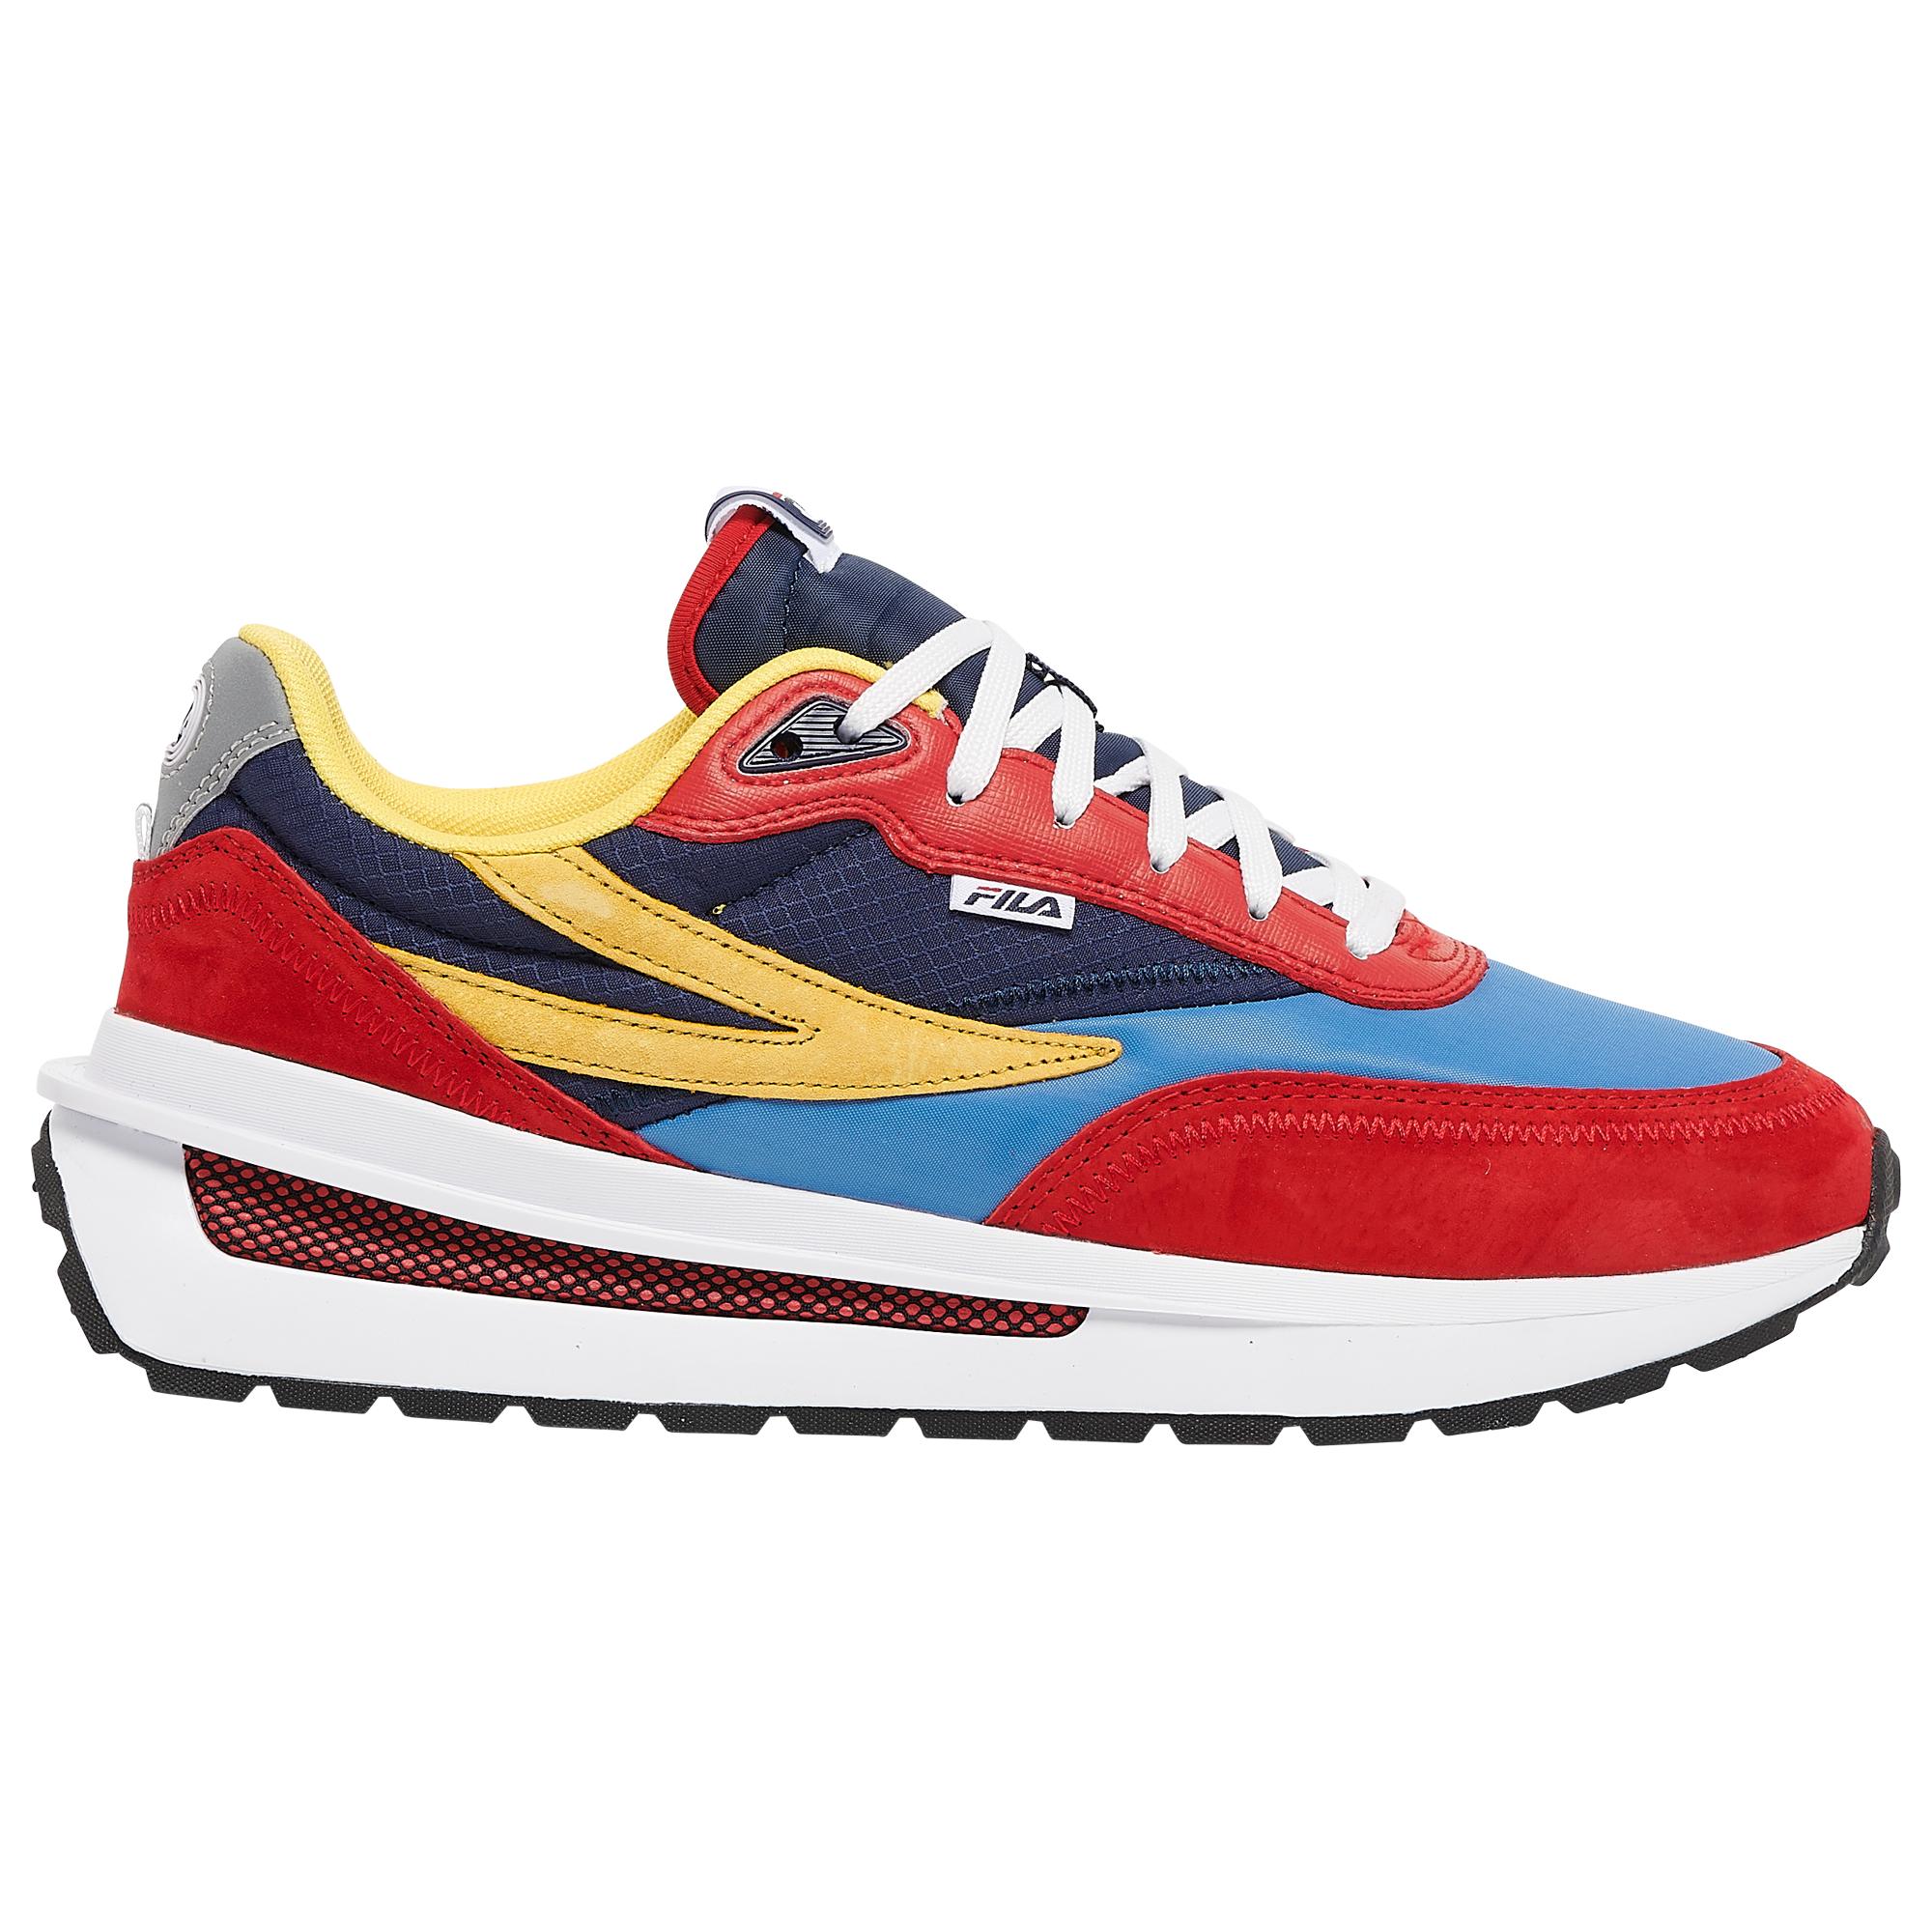 Fila Synthetic Renno - Running Shoes in Red/Blue/Yellow (Red) for 